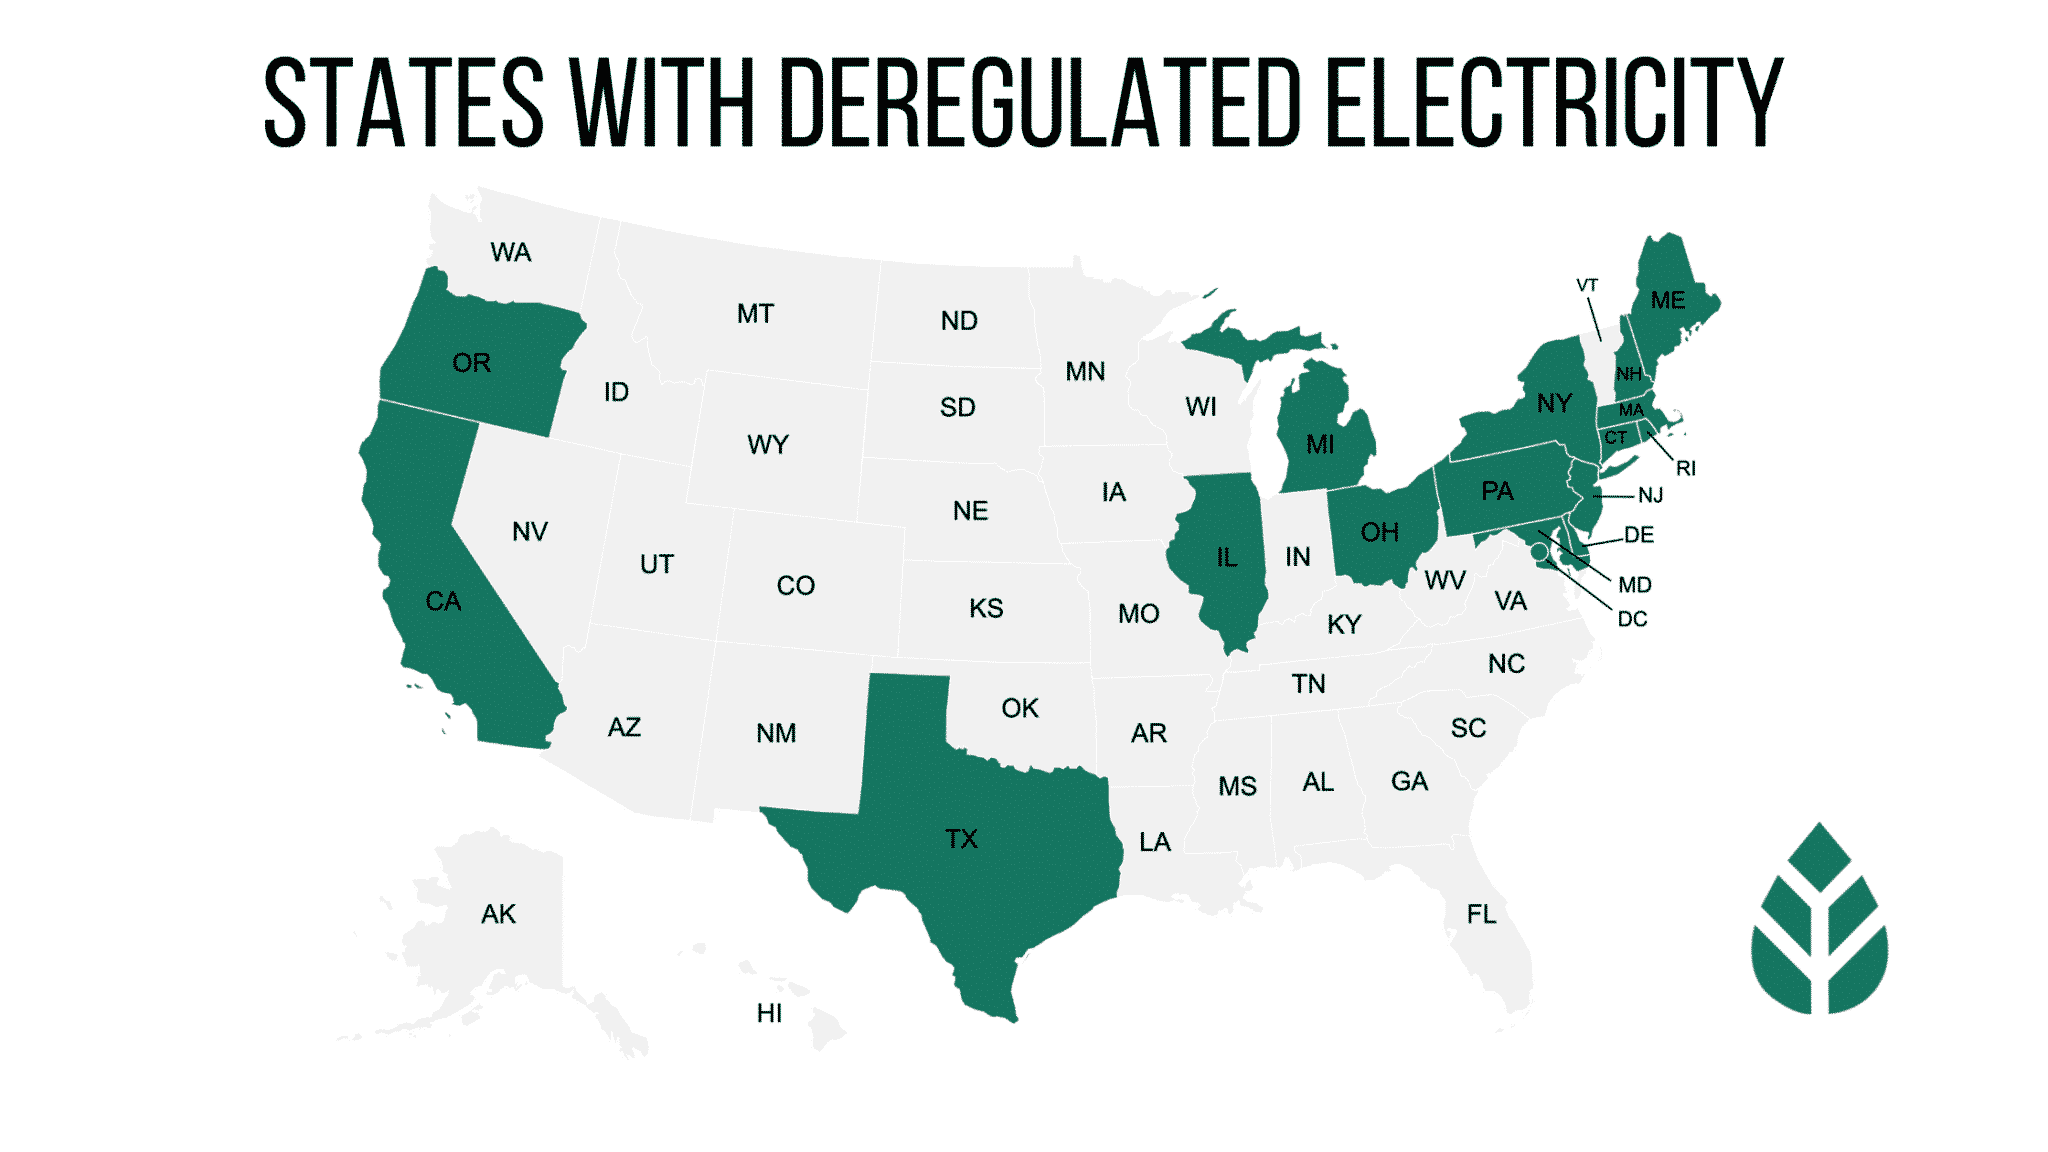 States with Deregulated Electricity